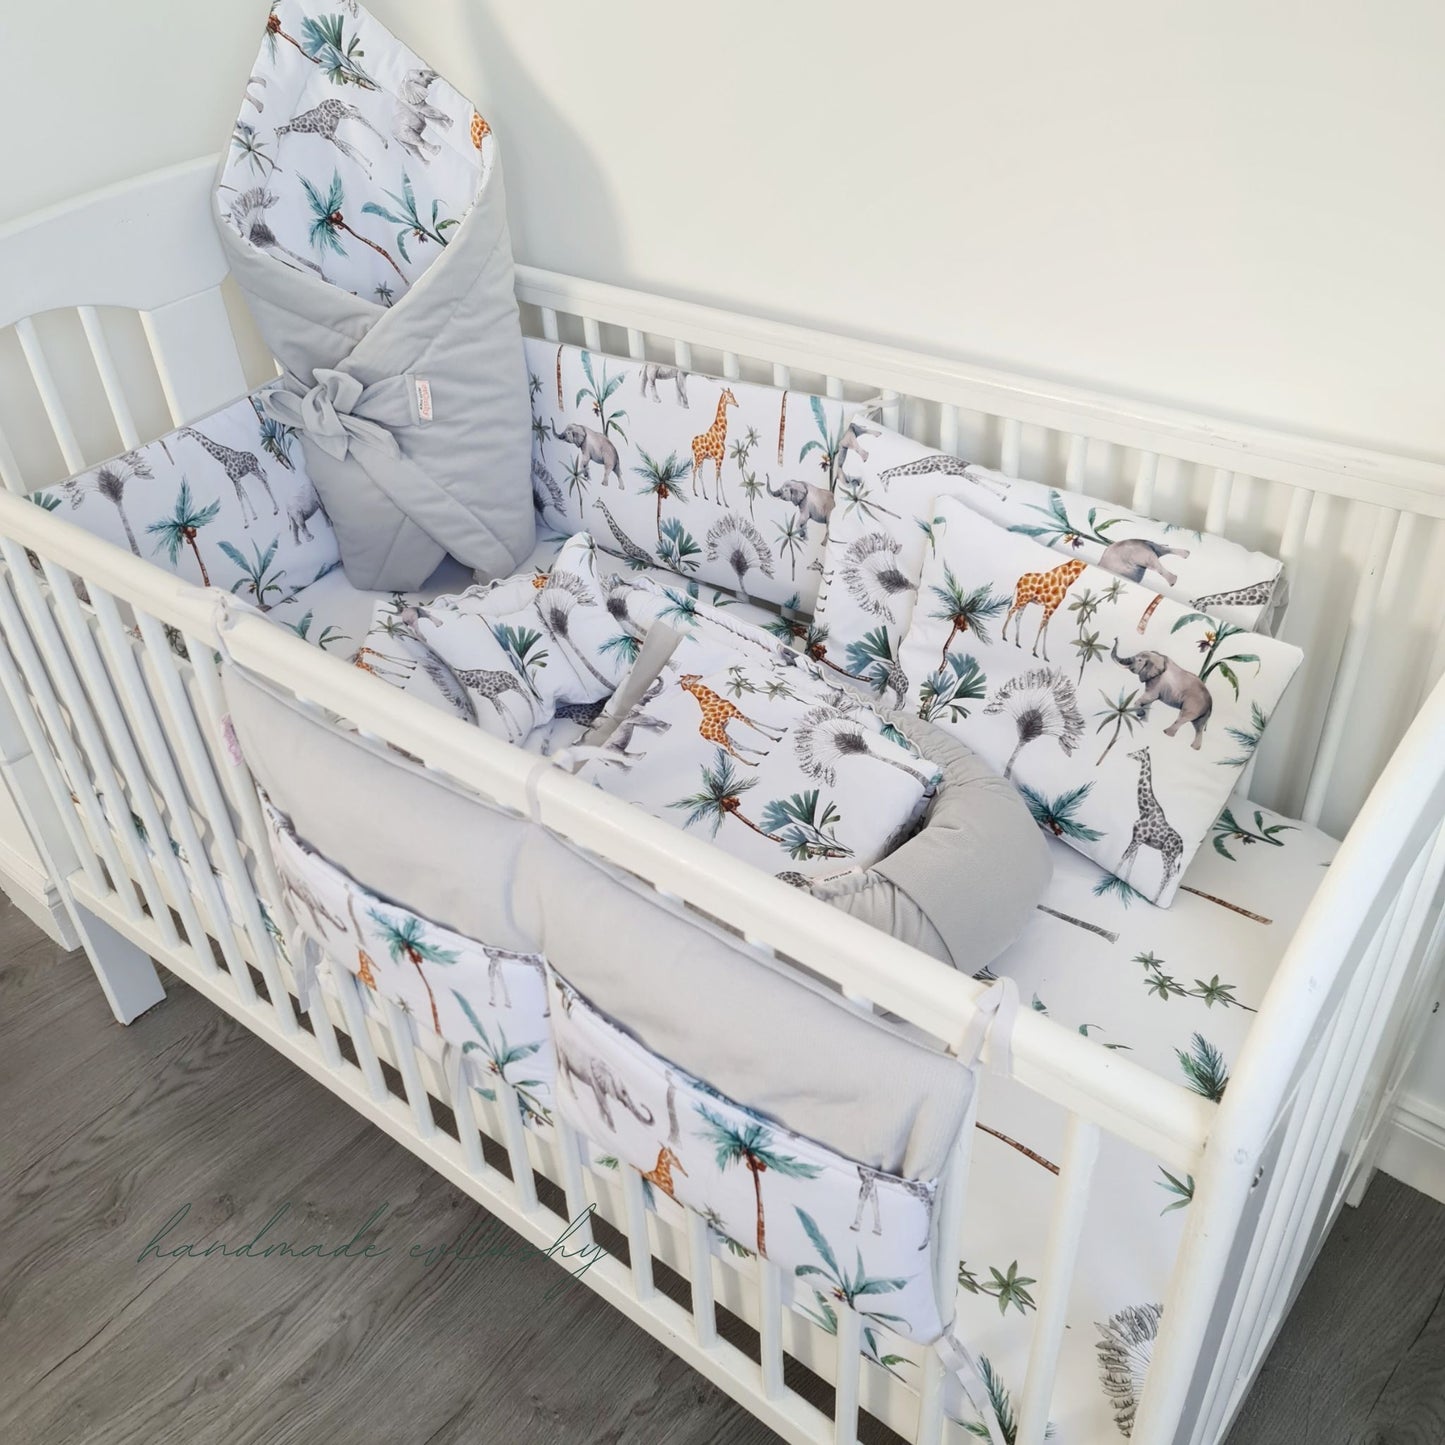 Elevate gifting with our 10-Piece Baby Set: A perfect blend of essentials and style for the little one. Crafted with love and care, it's the ultimate gift to delight new parents and welcome a new baby into the world